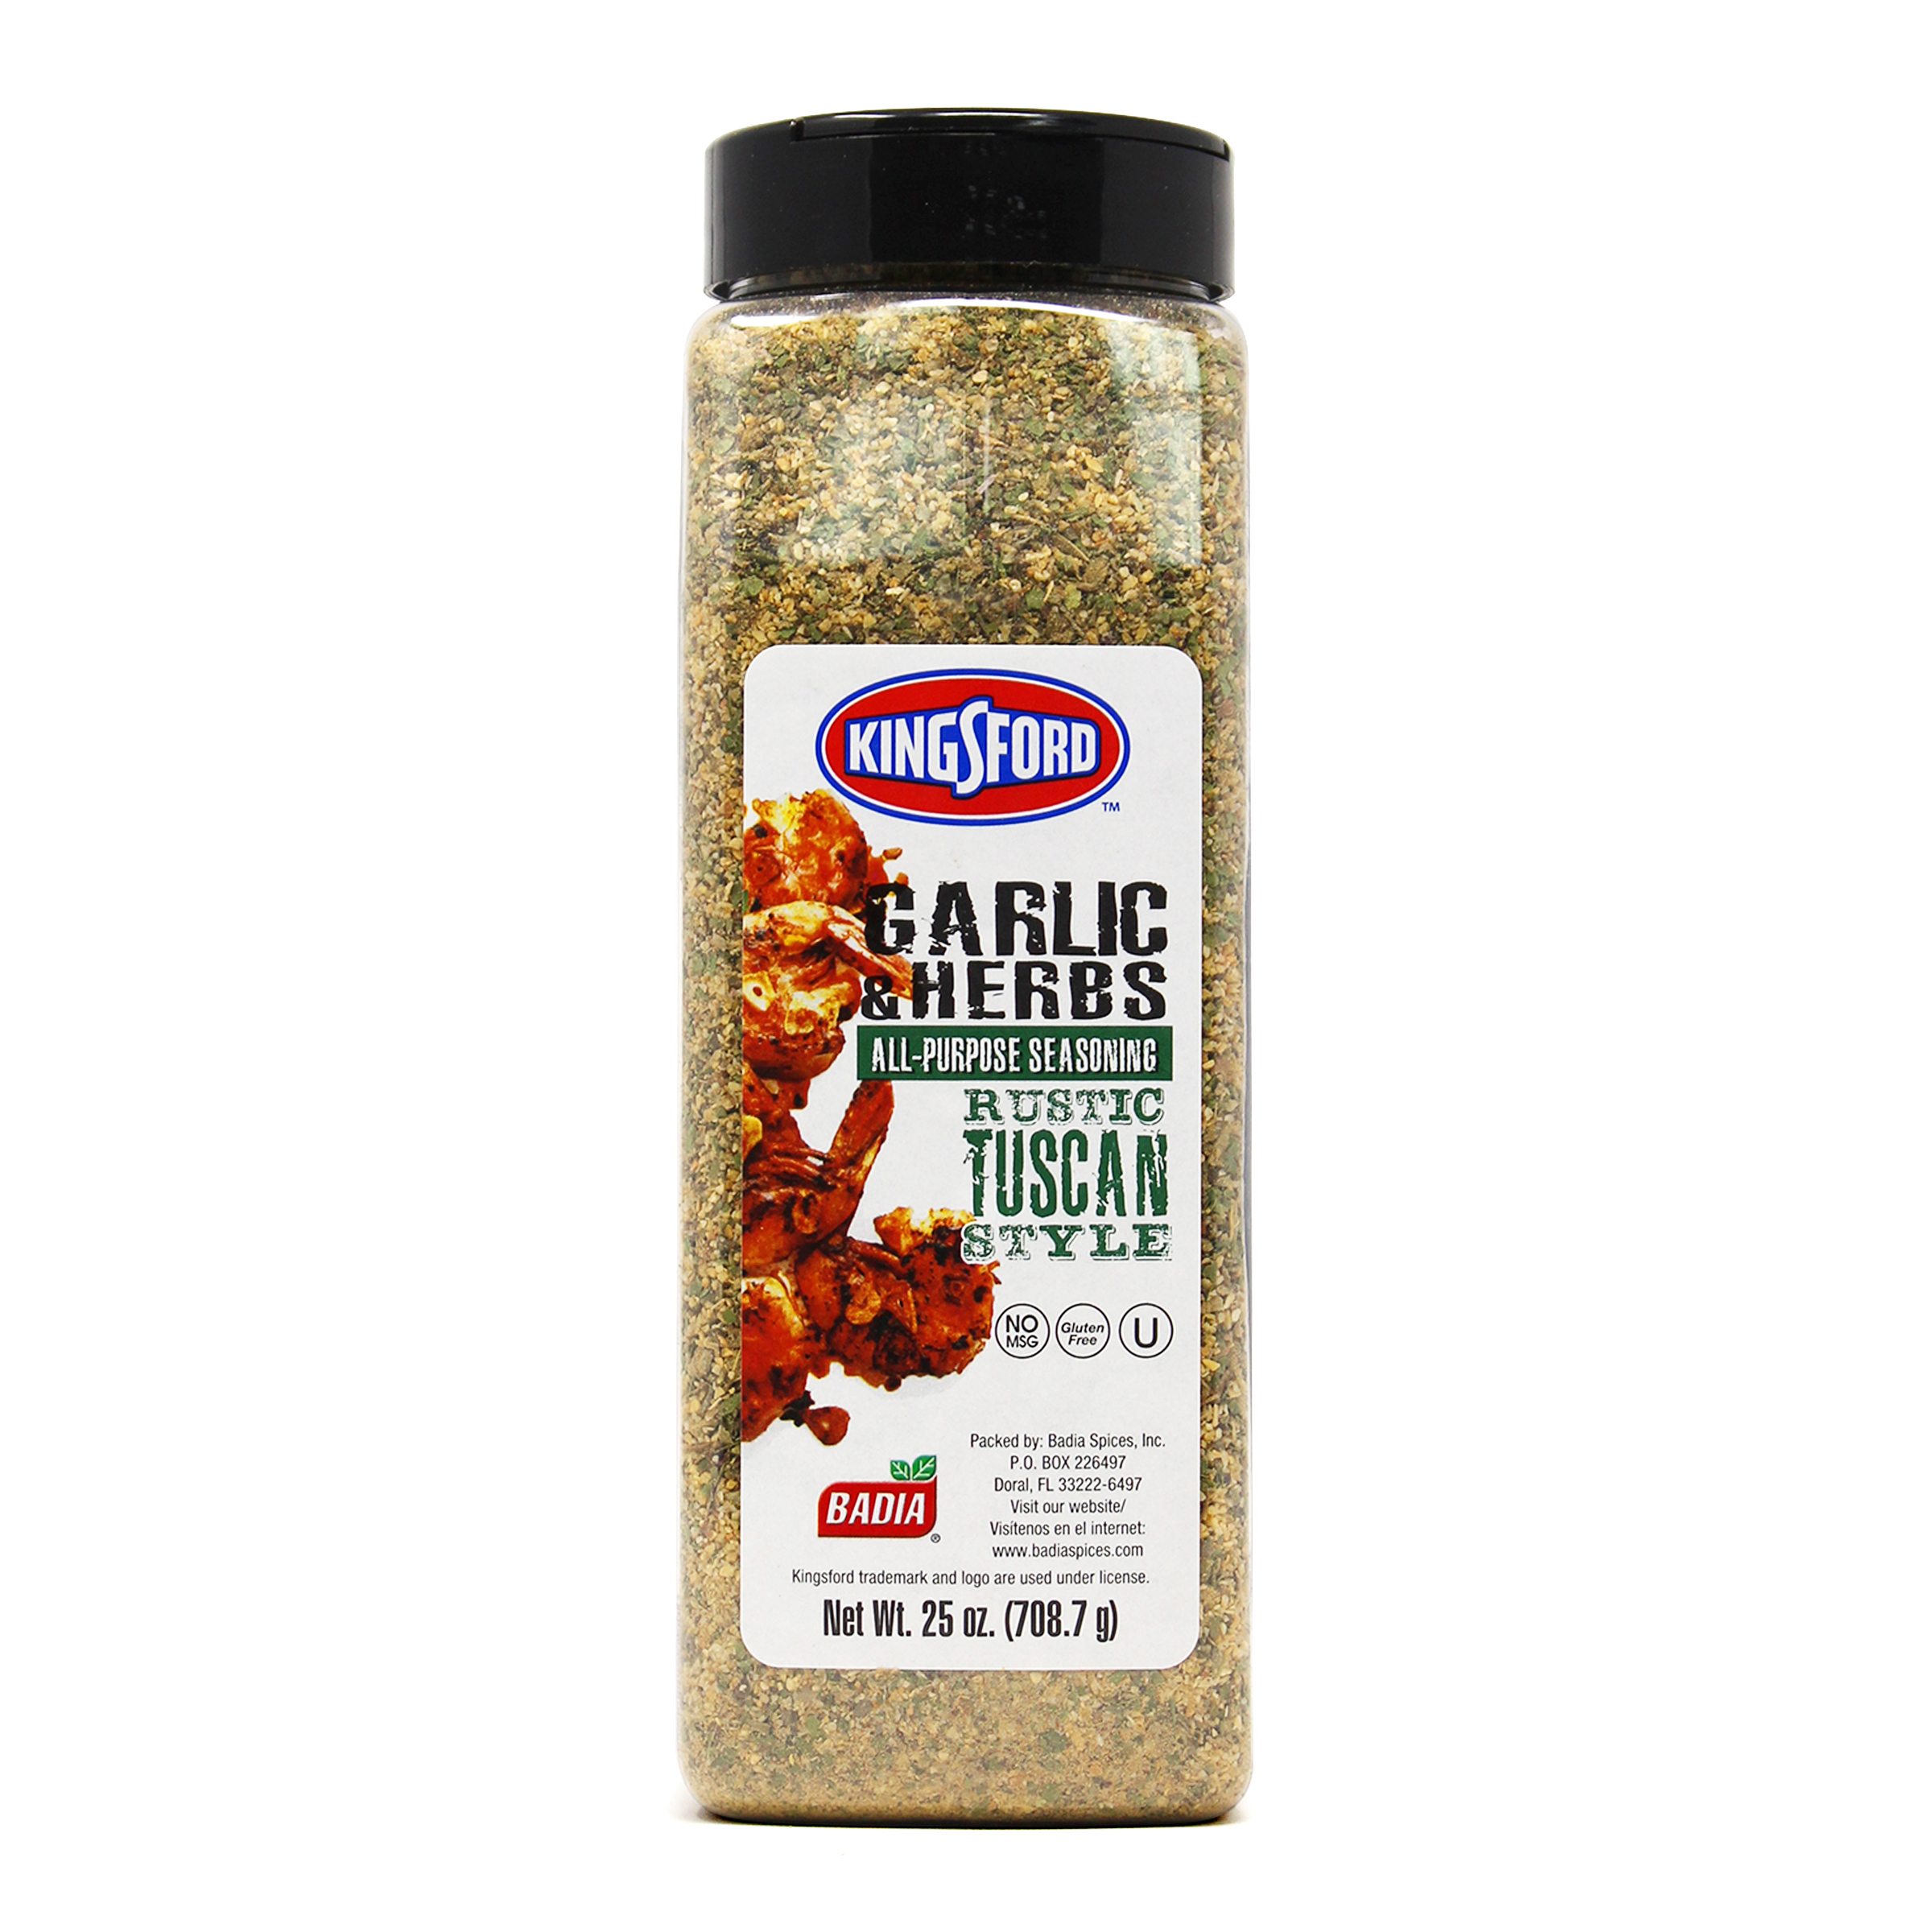 Laura's Creole Seasoning, Southern Hospitality Favorites: Laura's